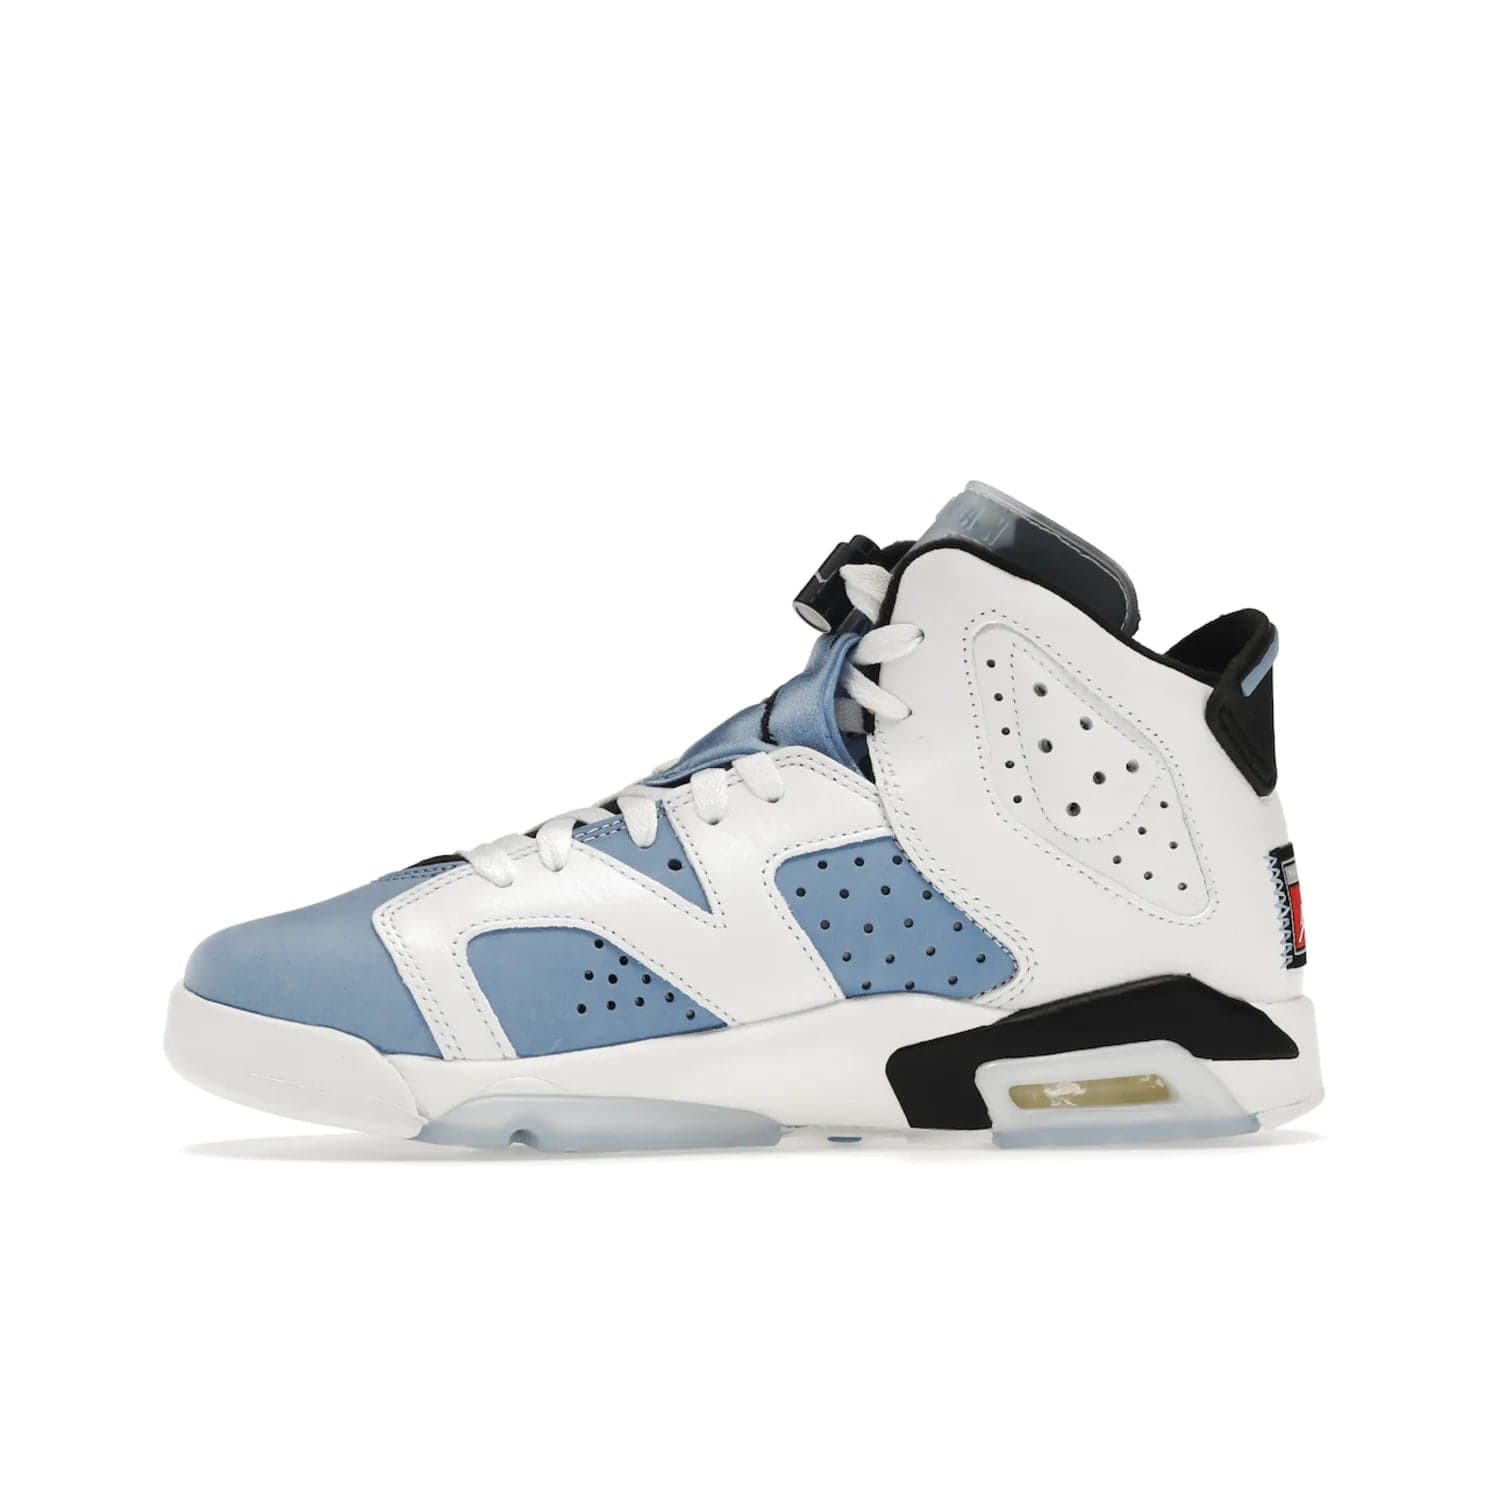 Jordan 6 Retro UNC White (GS) - Image 18 - Only at www.BallersClubKickz.com - Air Jordan 6 Retro UNC White GS: Michael Jordan alma mater, UNC Tar Heels, featuring colorway, nubuck, leather, Jumpman branding and a visible Air unit. Translucent blue/white outsole, perfect for completing sneaker rotation.